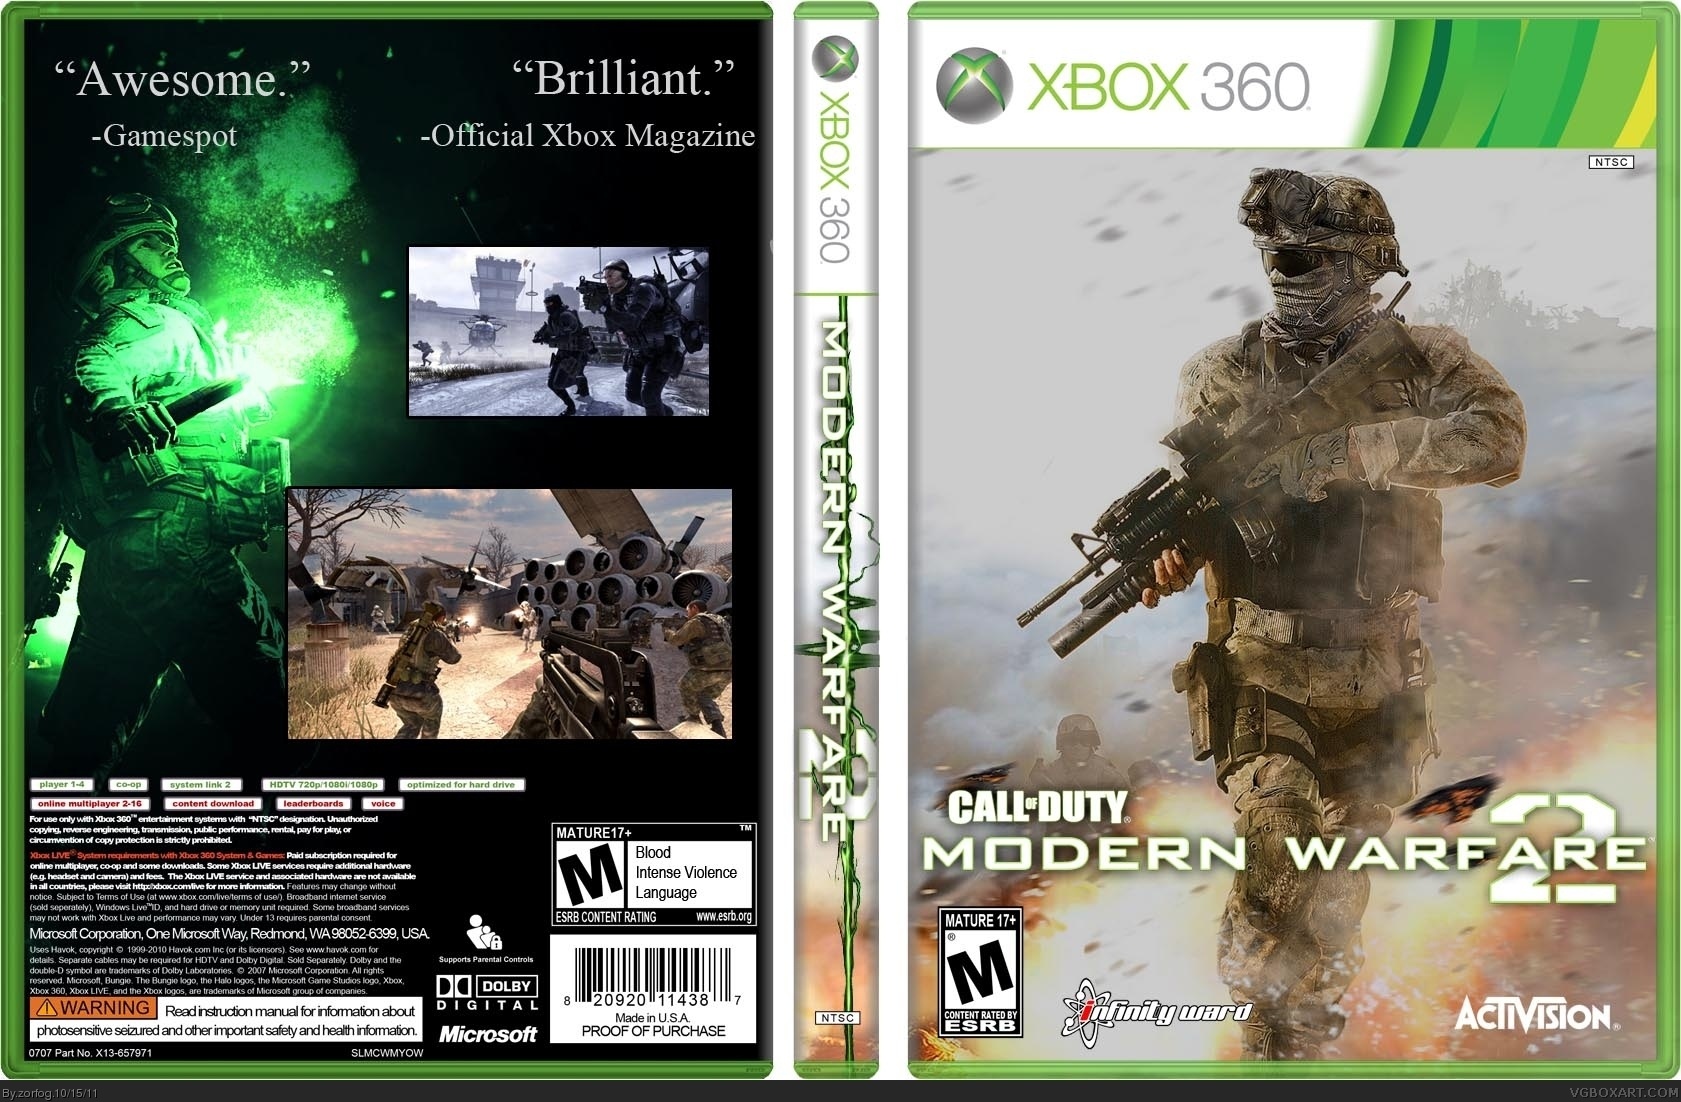 call of duty 2 for xbox360